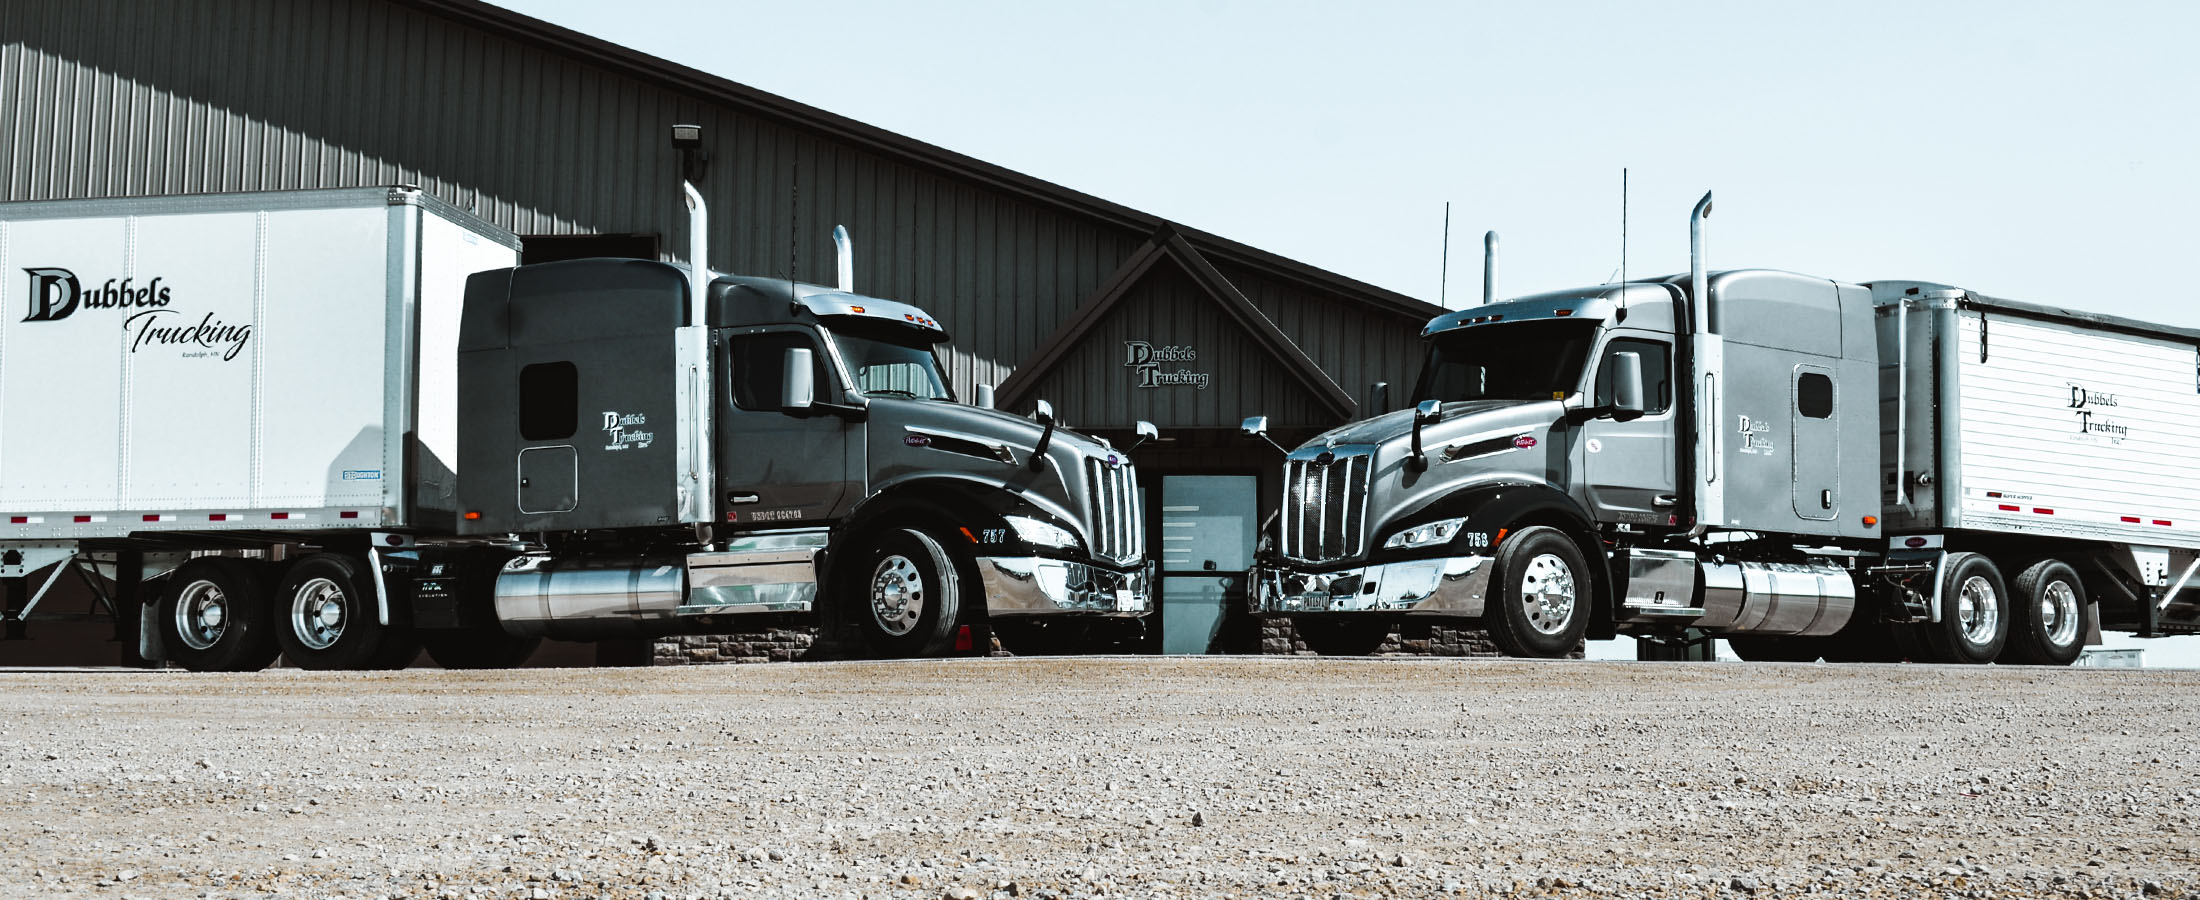 Two Dubbels Trucking semi tractors in front of Dubbels Trucking building | Fleet Services